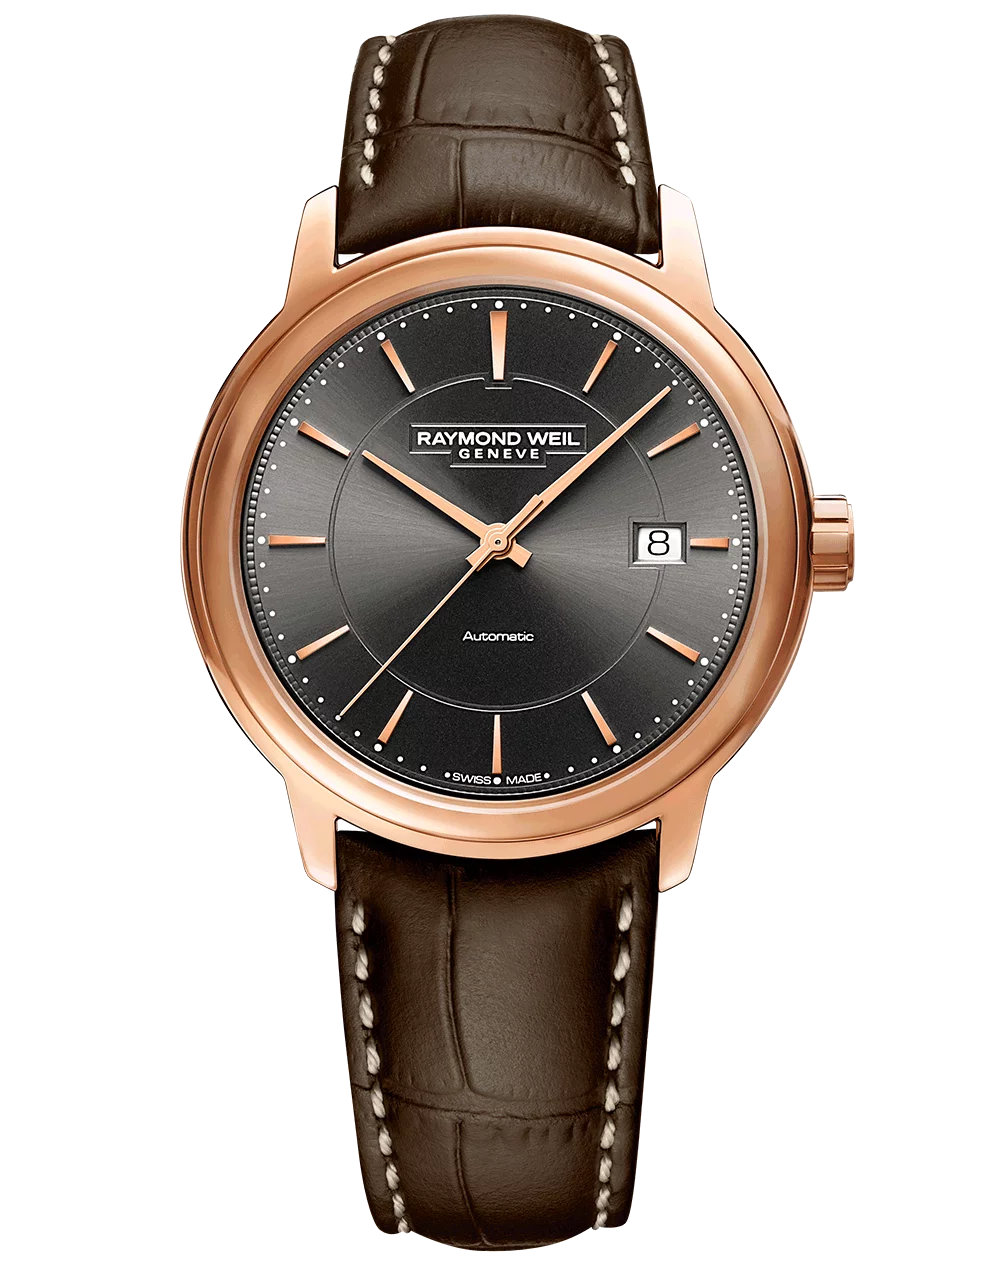 Gents Rose Gold Tone Stainless Steel Raymond Weil Maestro Automatic Watch (39.5mm)